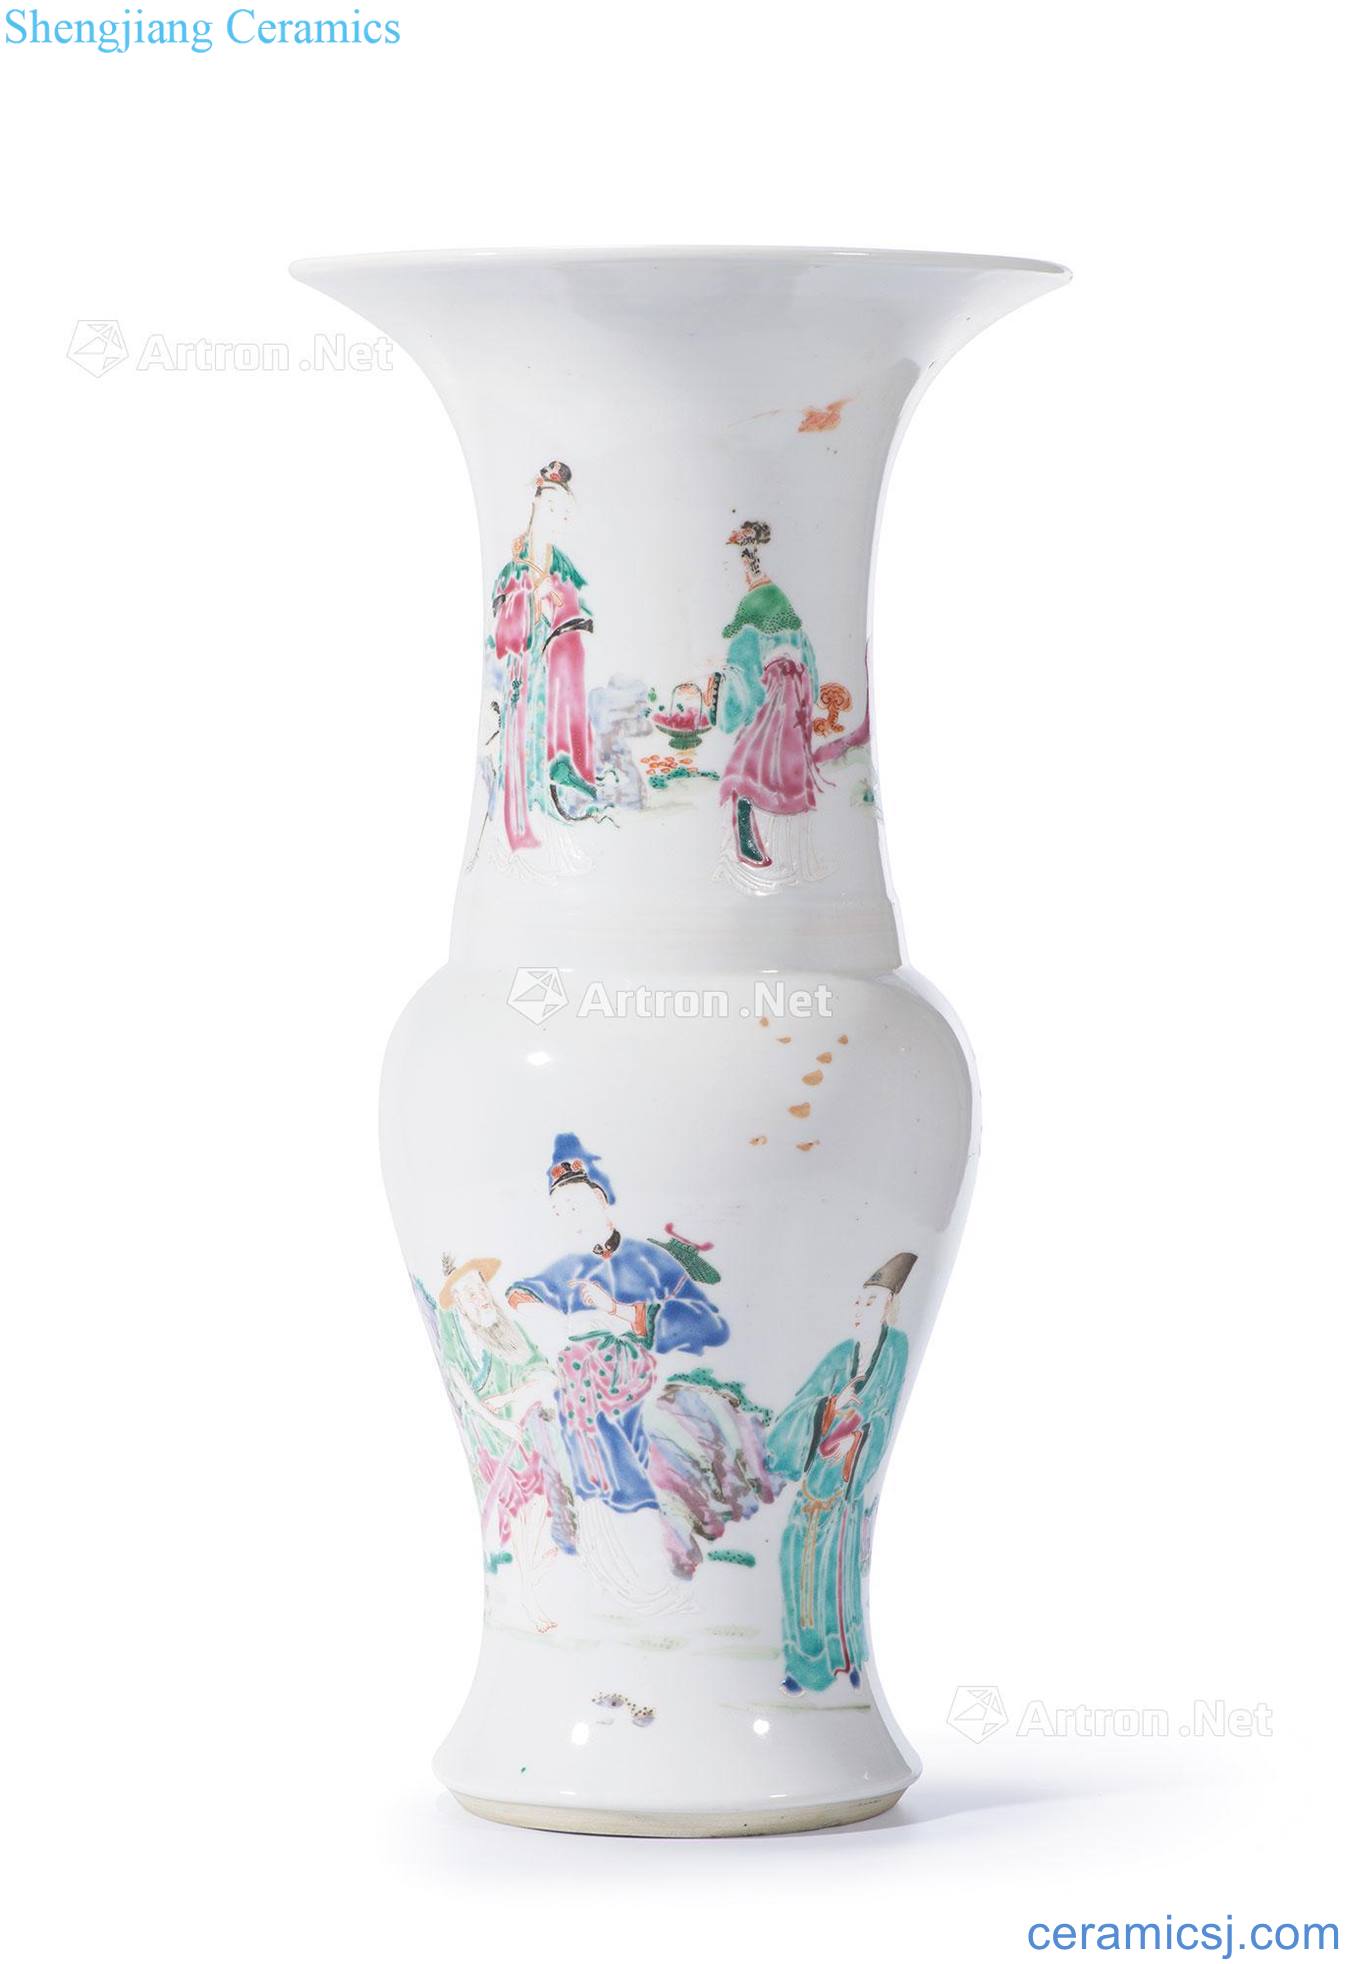 Stories of qing yongzheng pastel figure vase with flowers